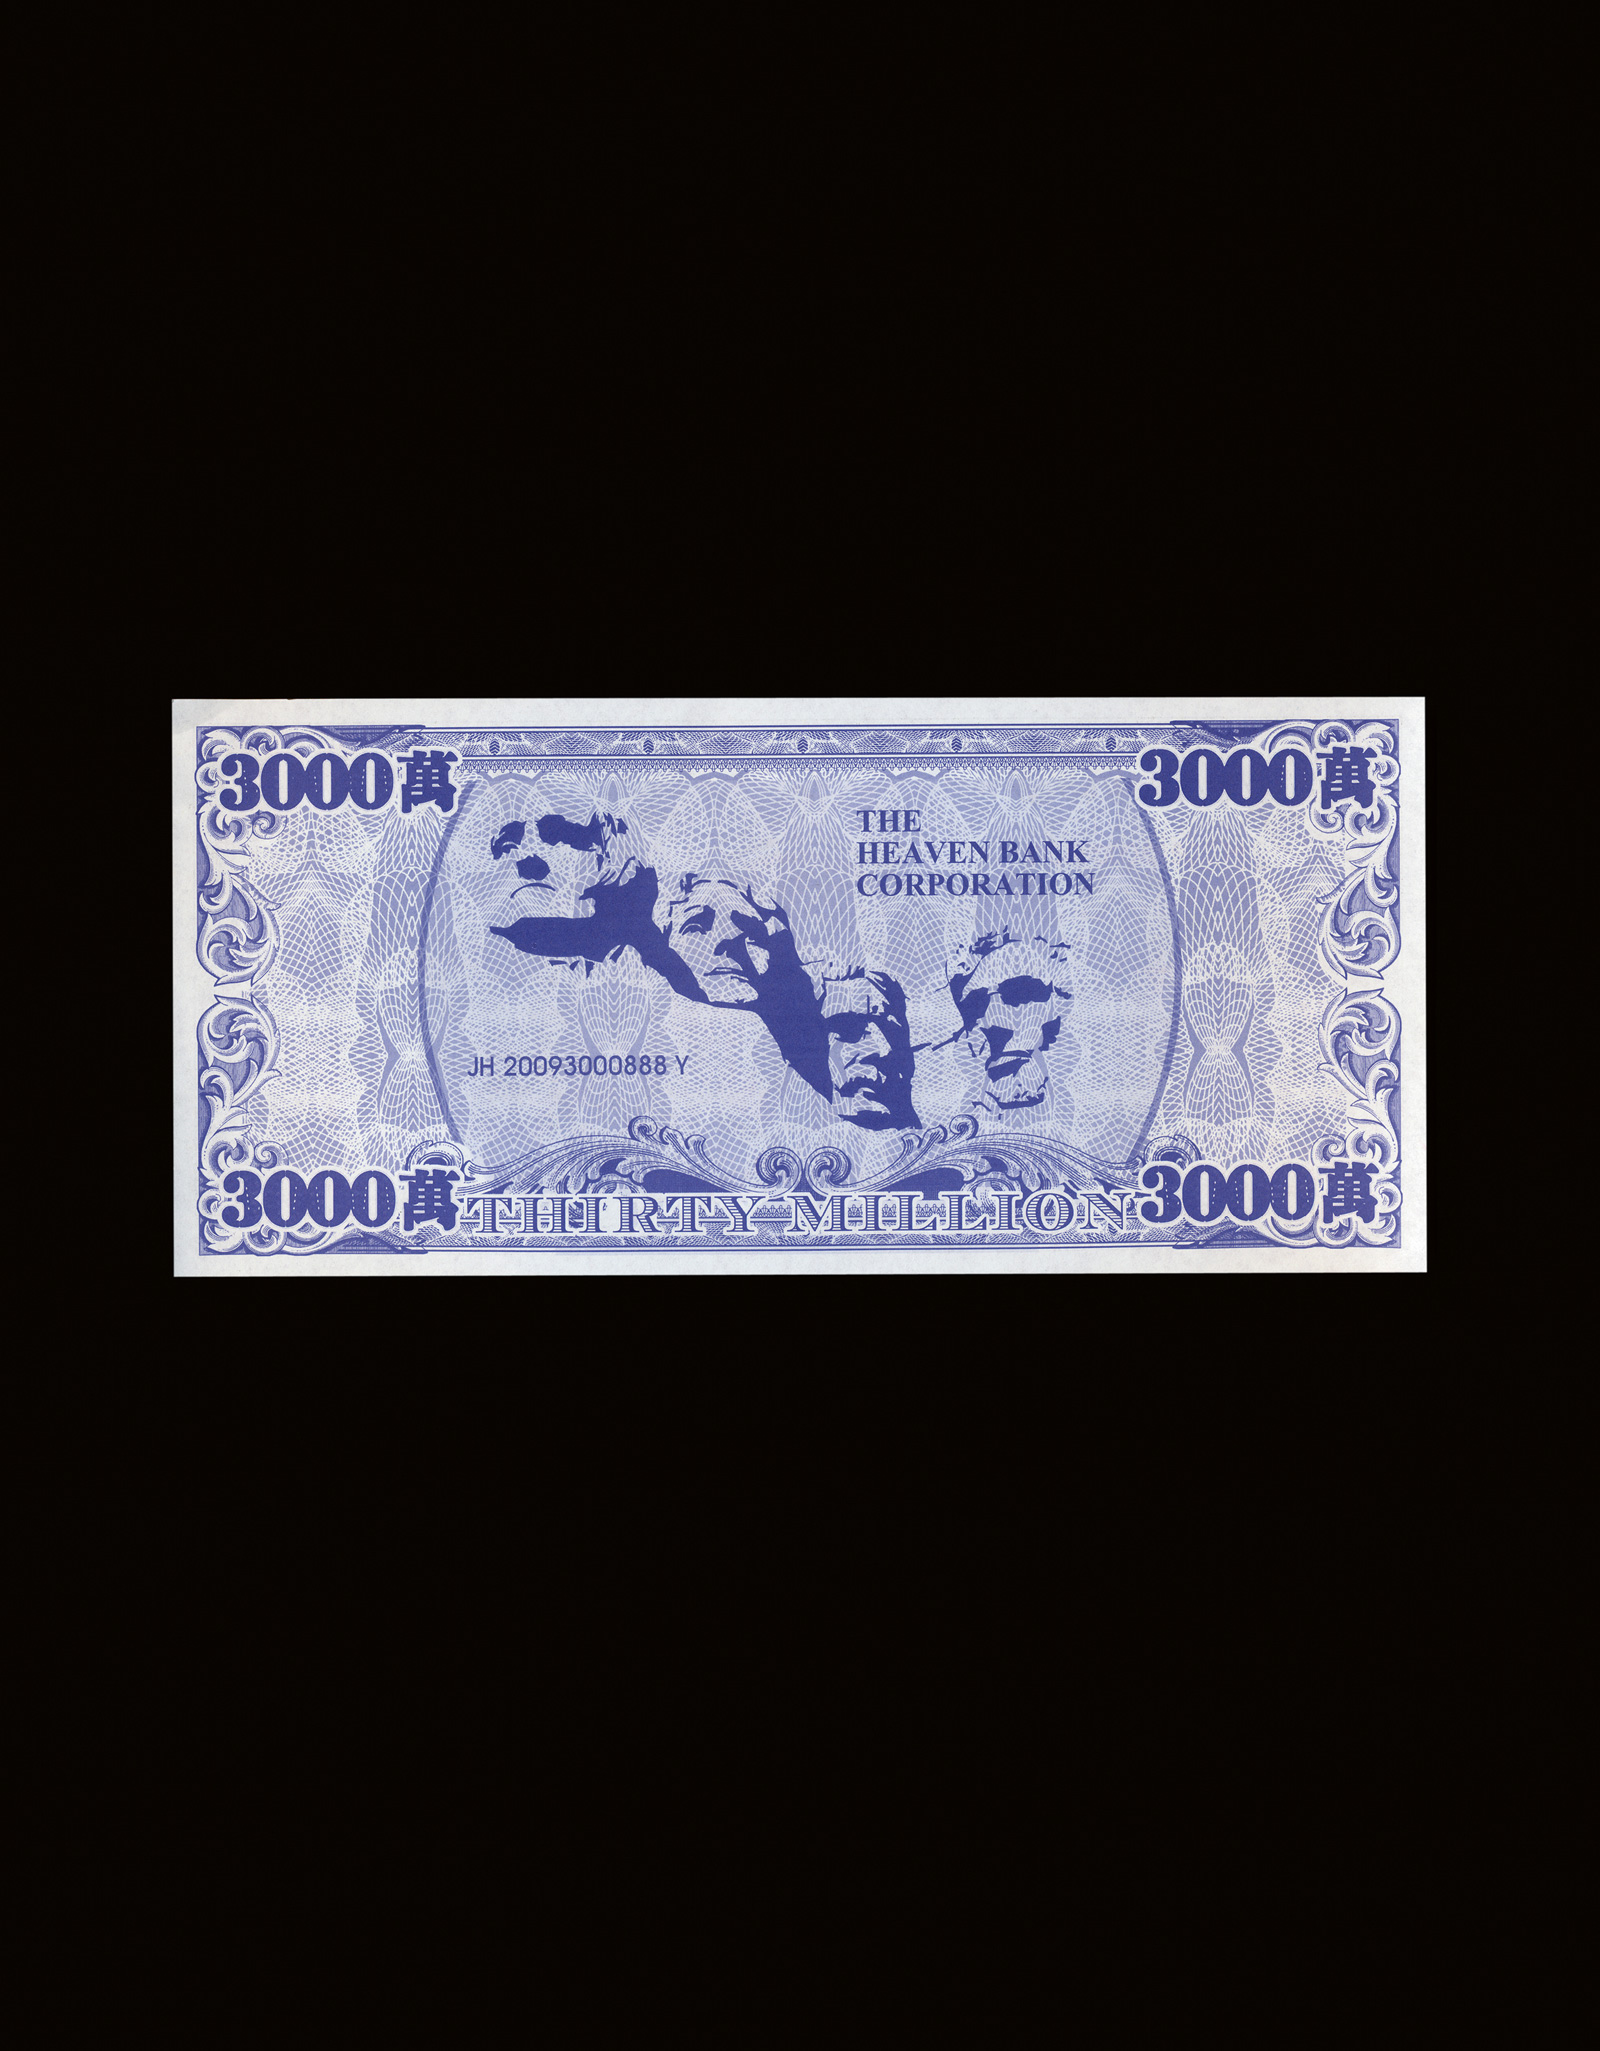 A Chinese “Bank of Heaven” note decorated with the four presidential busts of Mount Rushmore. A variant on traditional joss paper, these notes are burned as an offering to recently deceased ancestors.